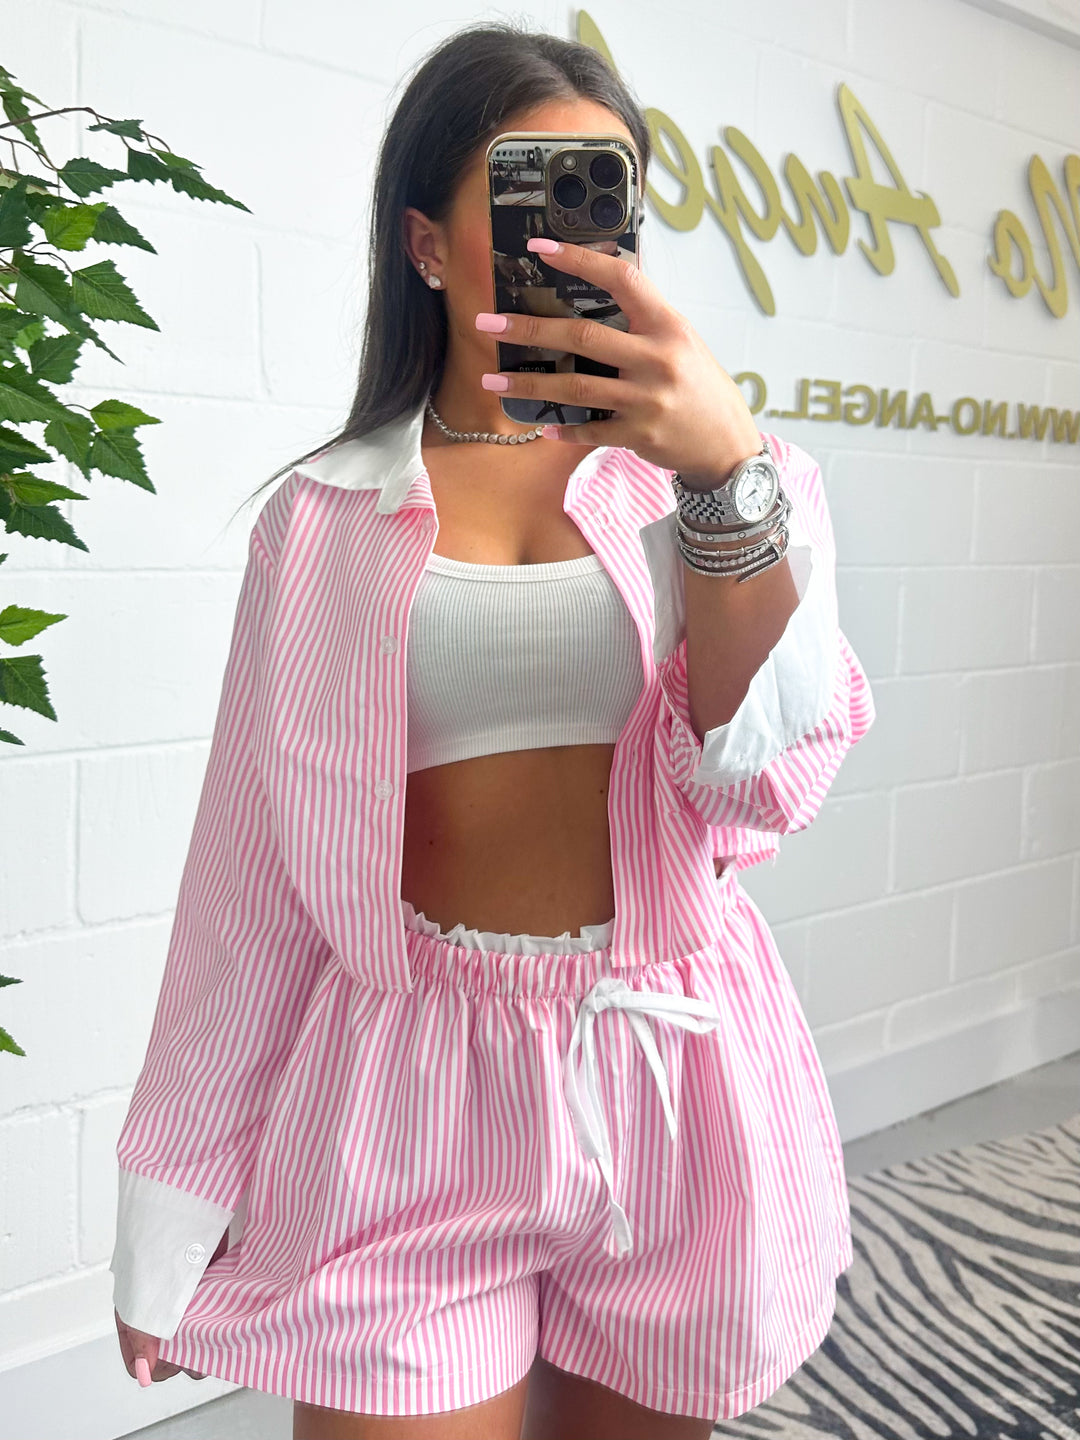 Striped collared shirt and shorts co-ord